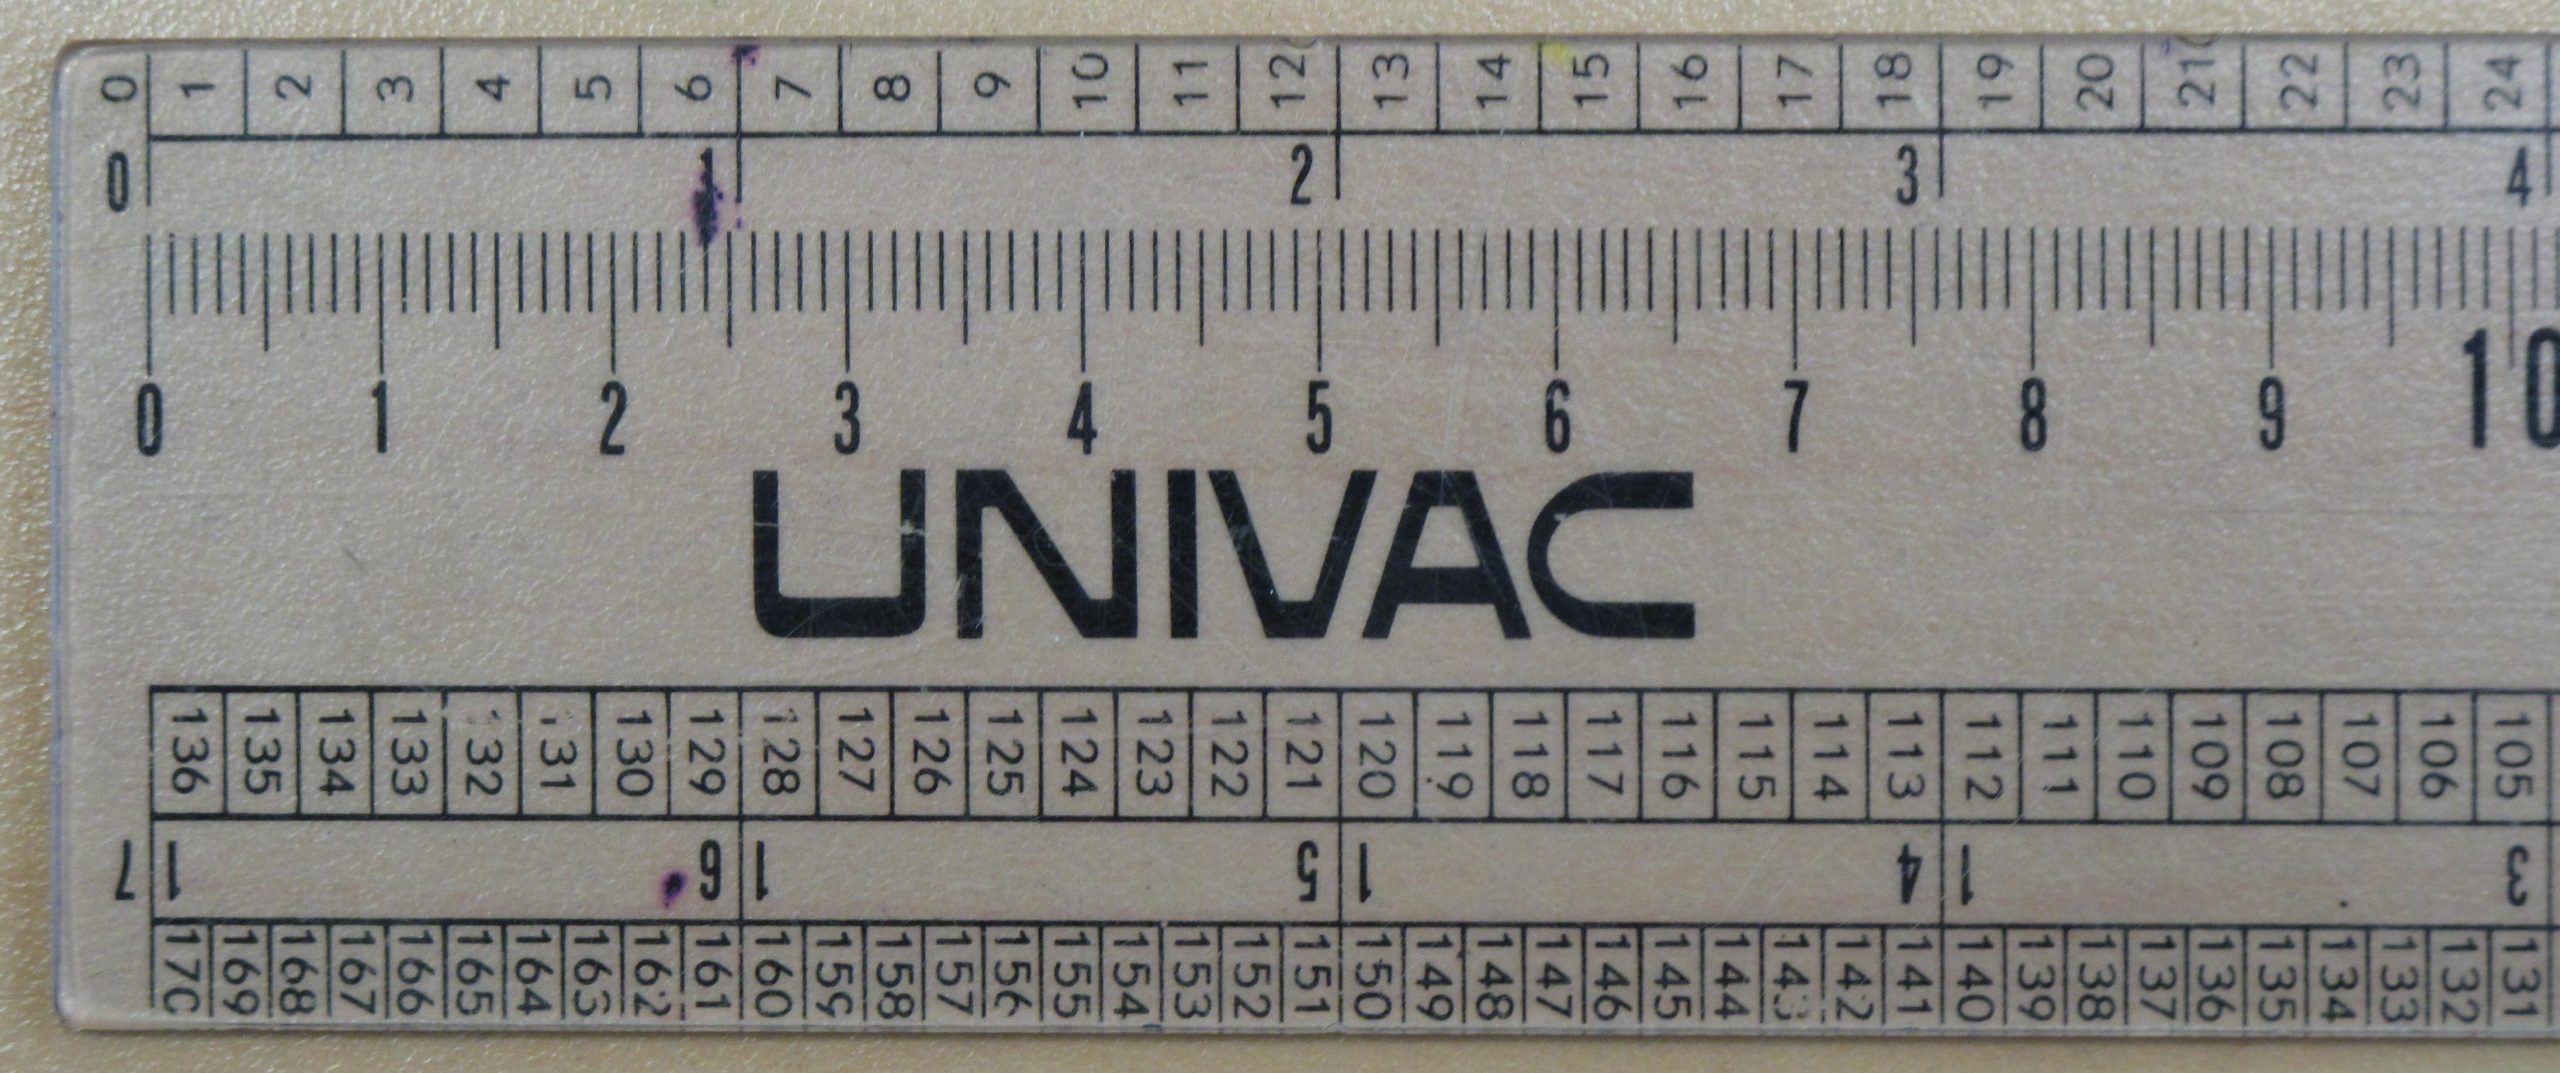 File:ruler 4Scales Details - Wikimedia Commons